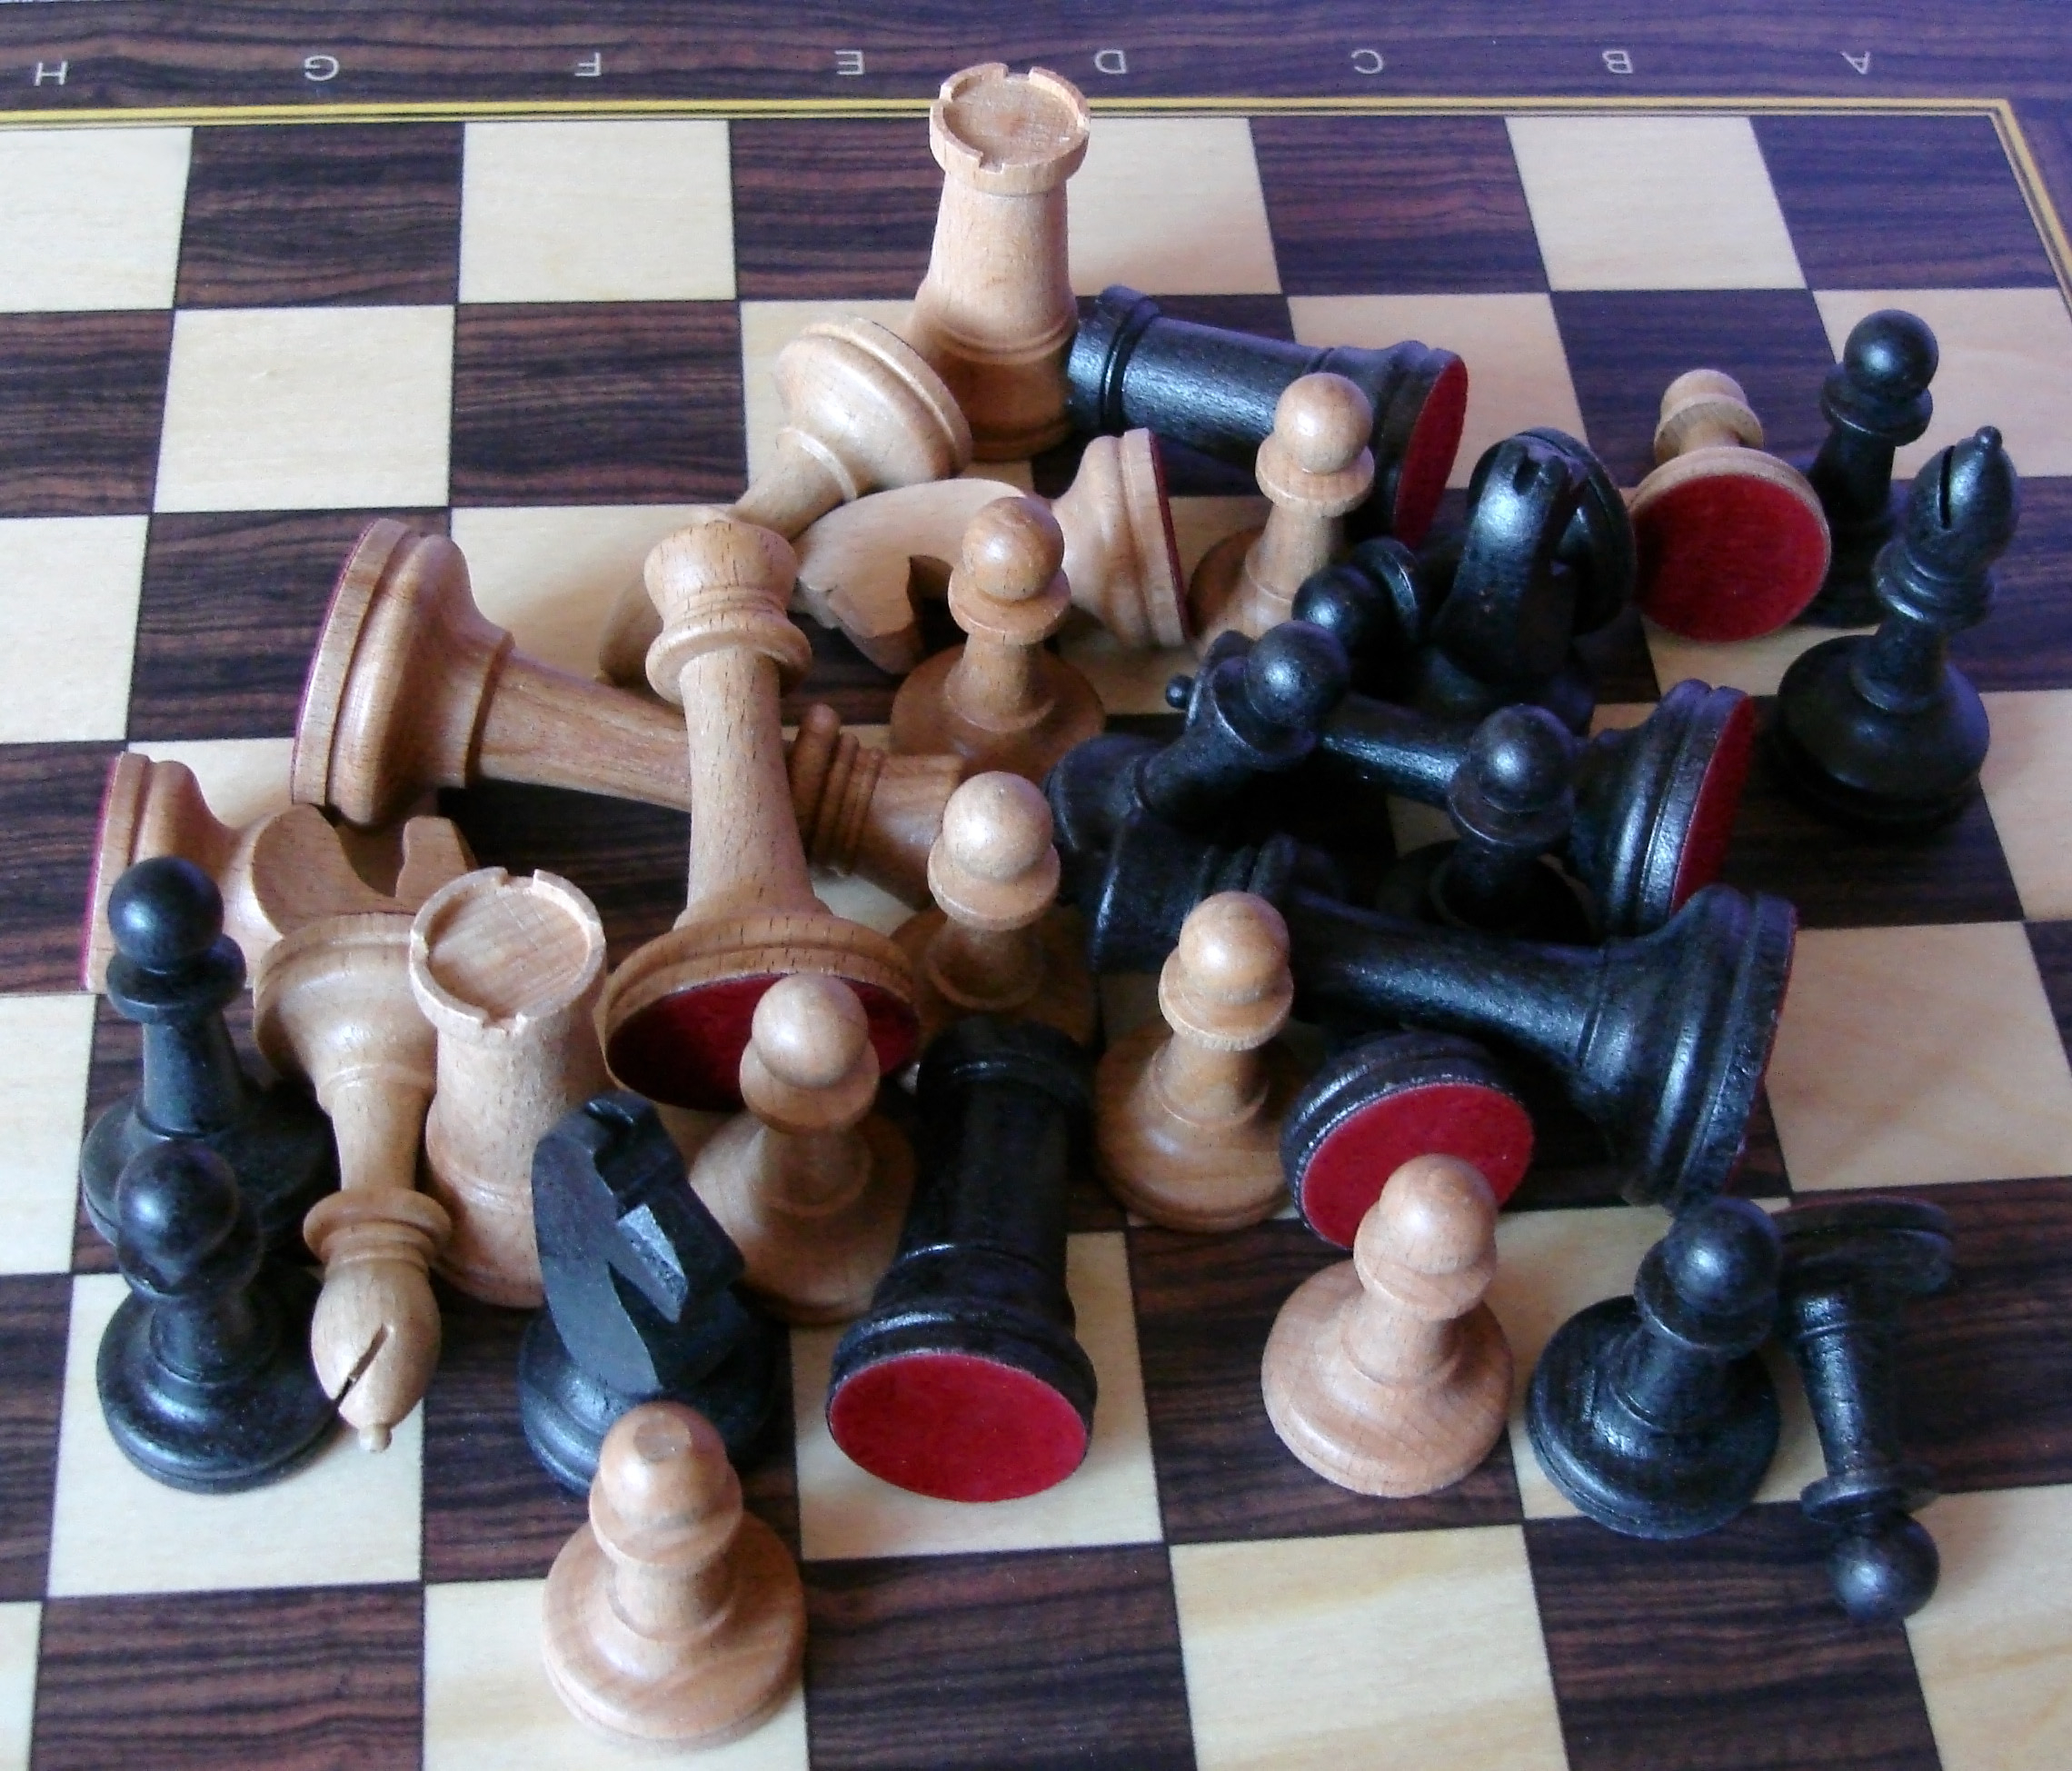 How Chess Can Make You Better at Forensic Analysis